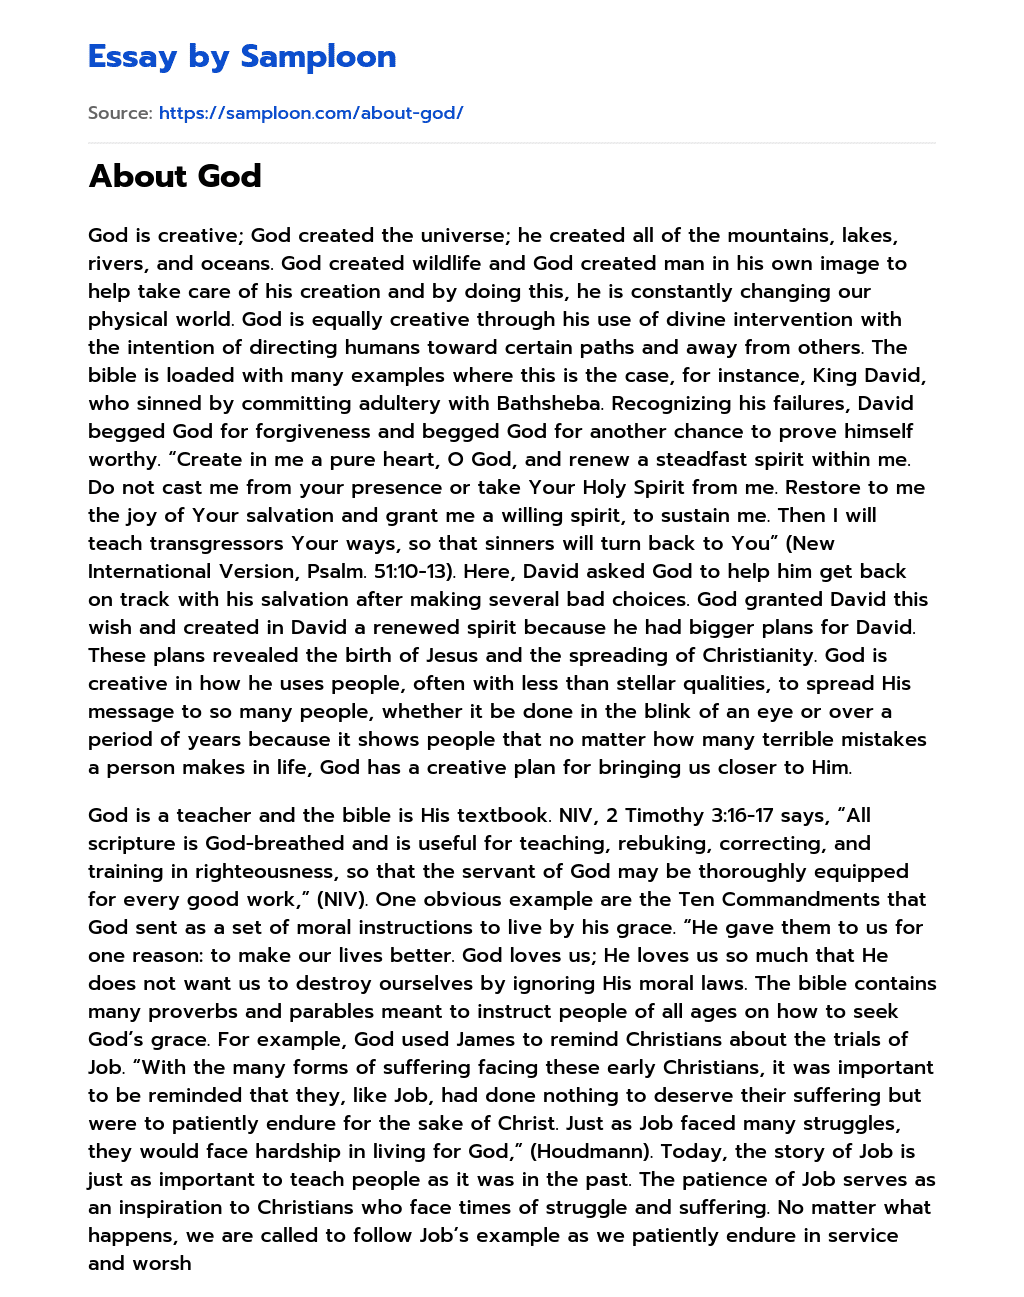 About God essay